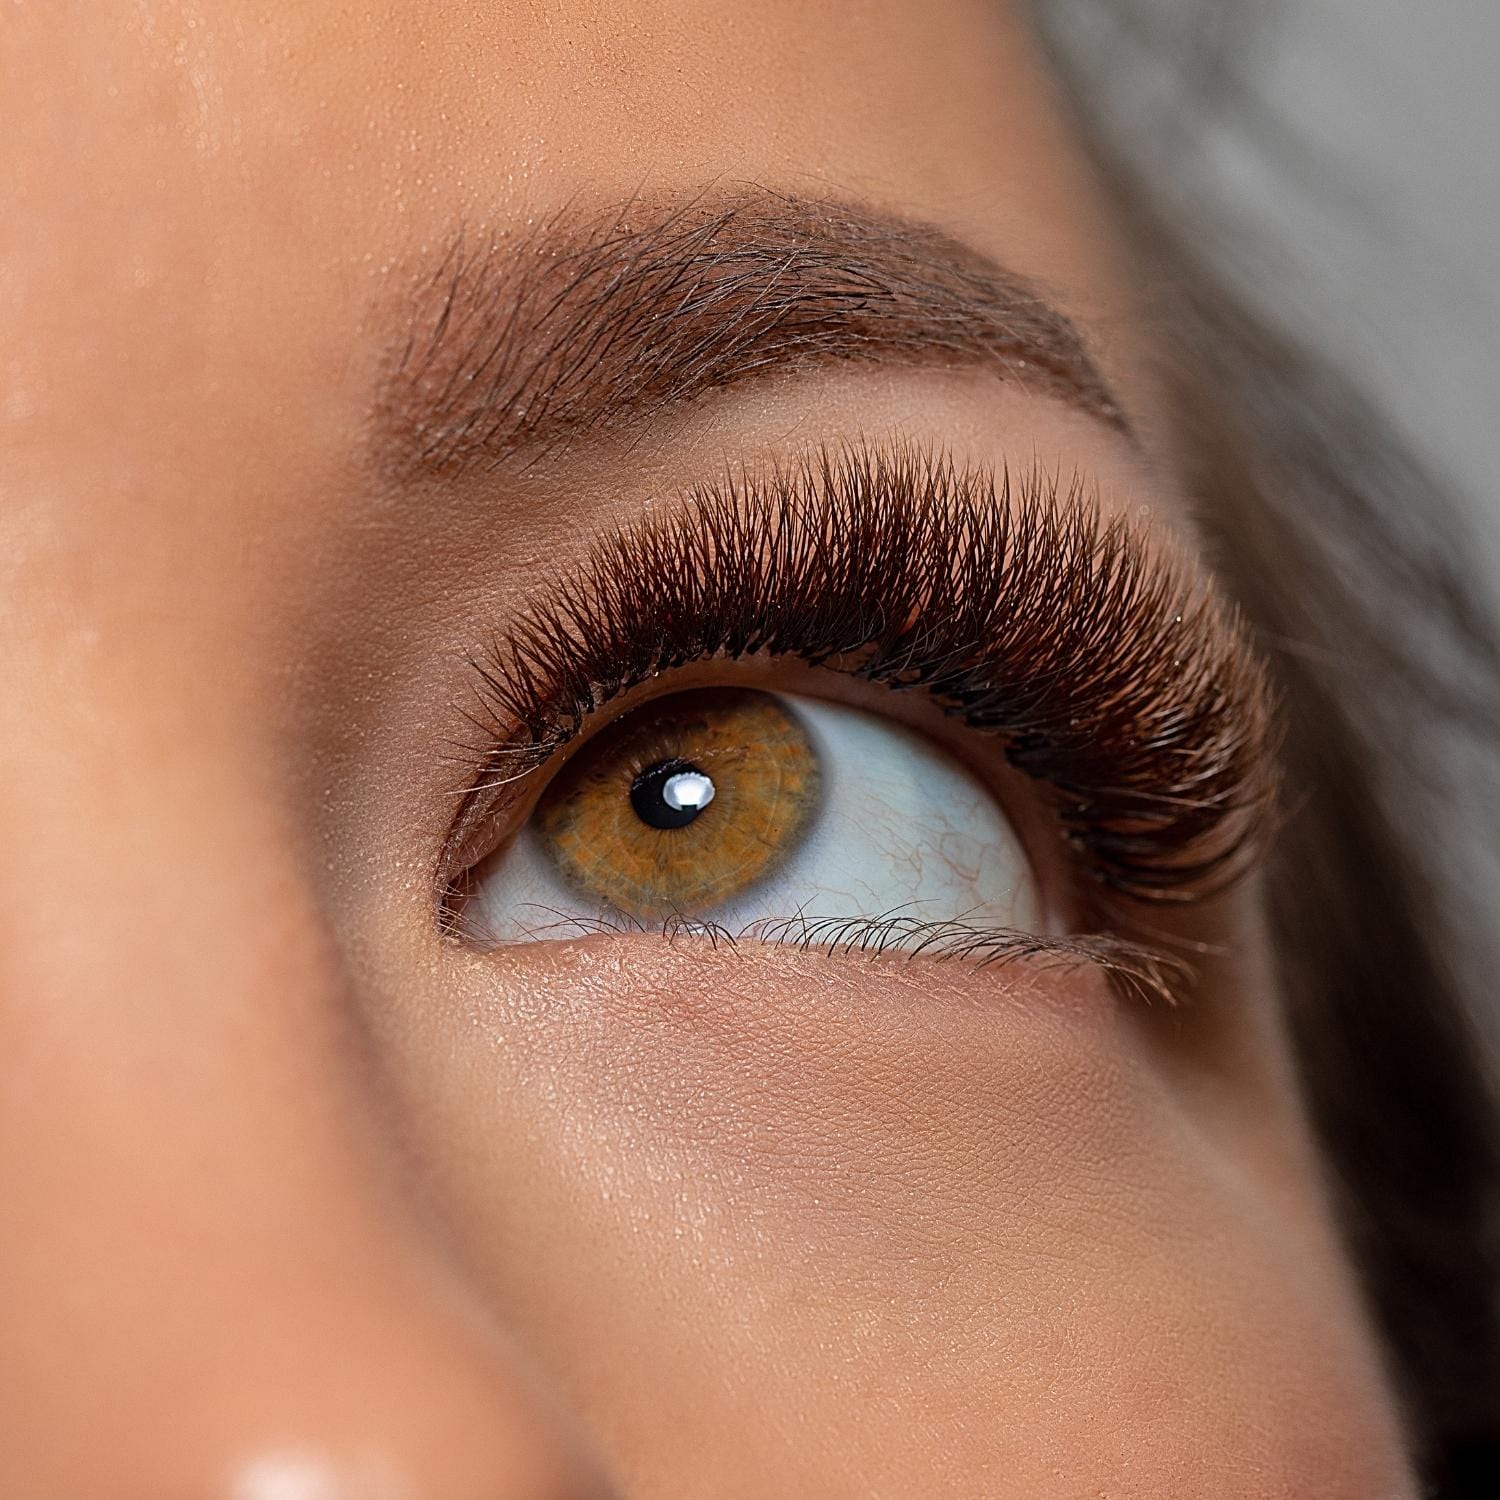 How to Clean and Care for Eyelash Extensions, According to Lash Techs